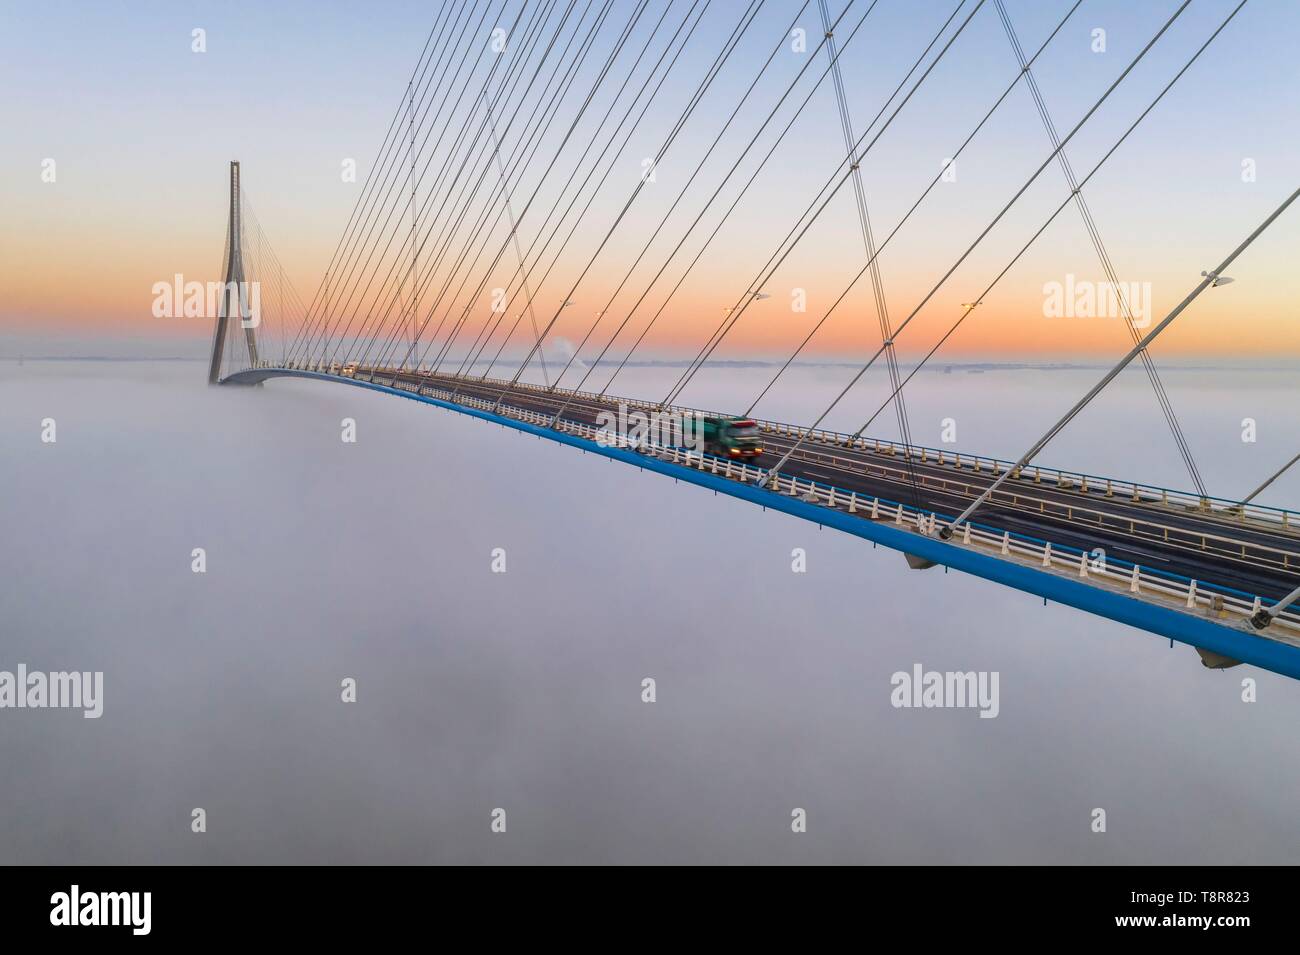 France, between Calvados and Seine Maritime, the Pont de Normandie (Normandy Bridge) emerges from the morning mist of autumn and spans the Seine to connect the towns of Honfleur and Le Havre Stock Photo